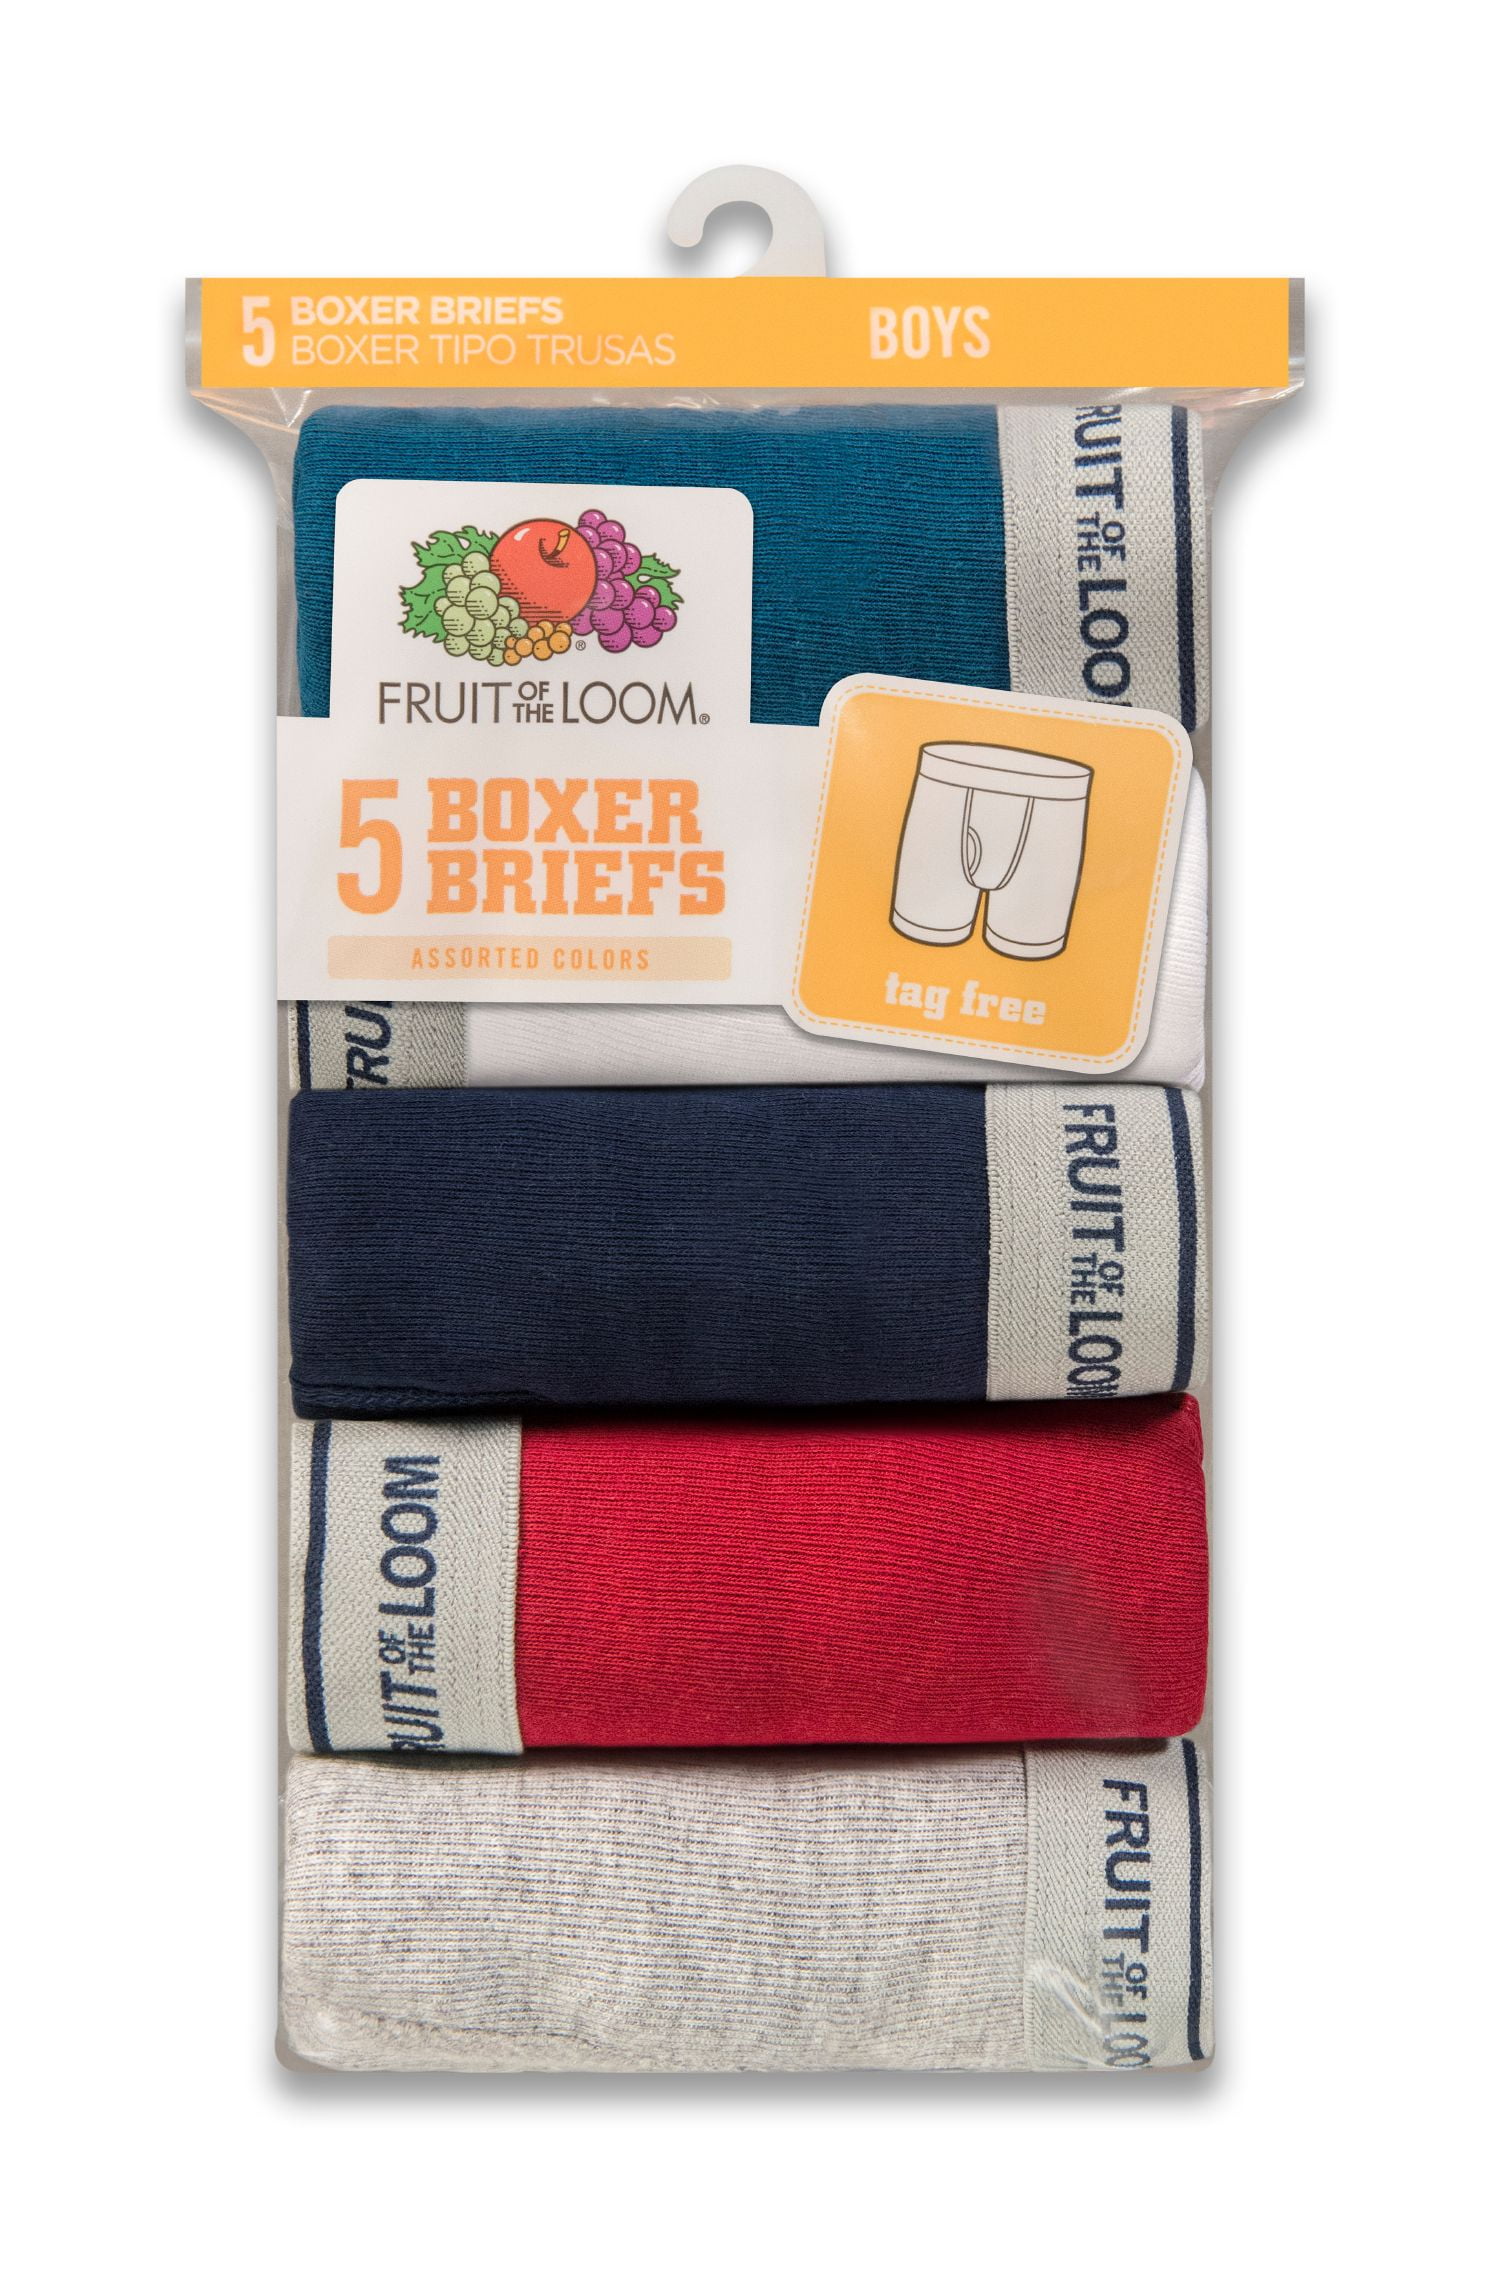 Fruit of the Loom Boys Boxer Briefs Assorted Colors